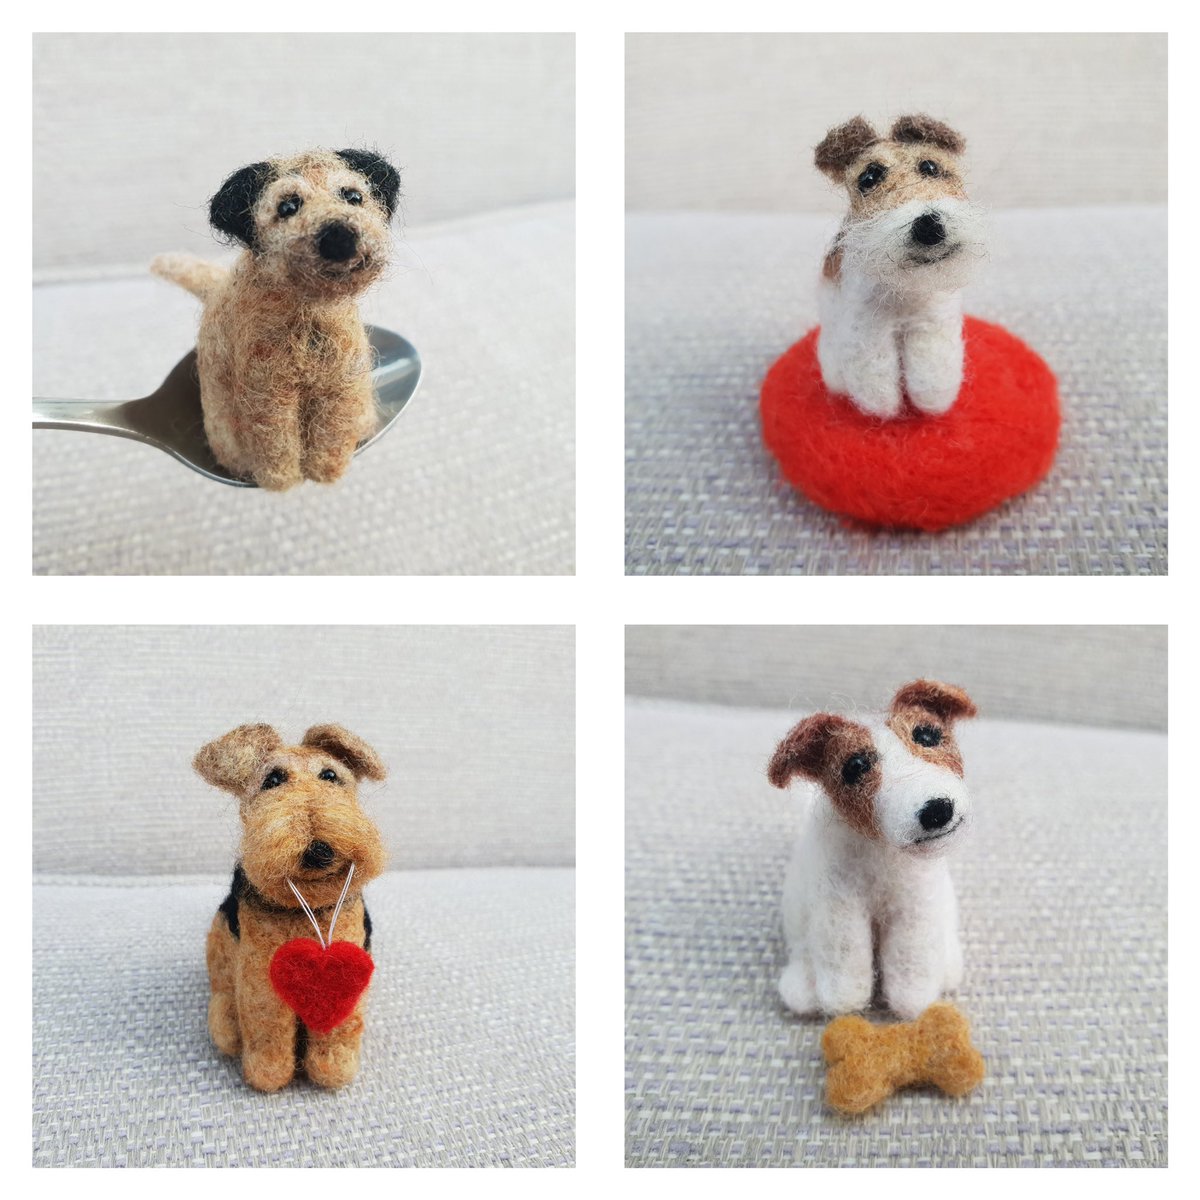 Happy Tuesday! Sharing a few of my creations who have recently found some lovely new homes. Thank you very much for keeping me busy 😍❤️ #etsy #dogsontwitter #dogs #DogsofTwittter #Christmas etsy.me/2Dw6qBQ